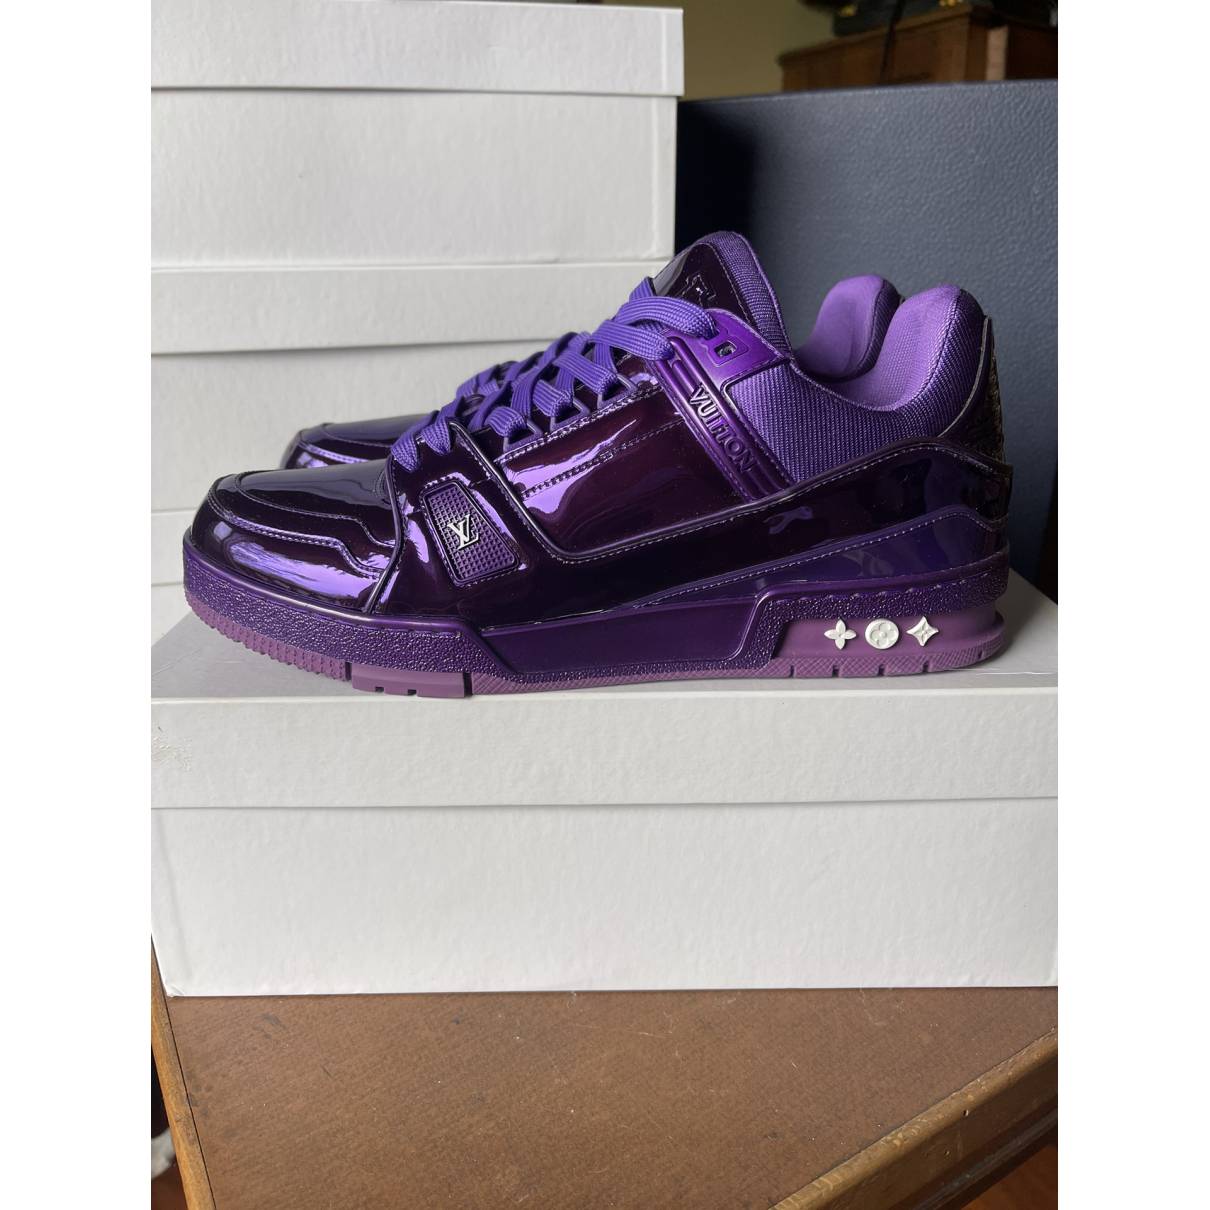 Lv trainer patent leather low trainers Louis Vuitton Purple size